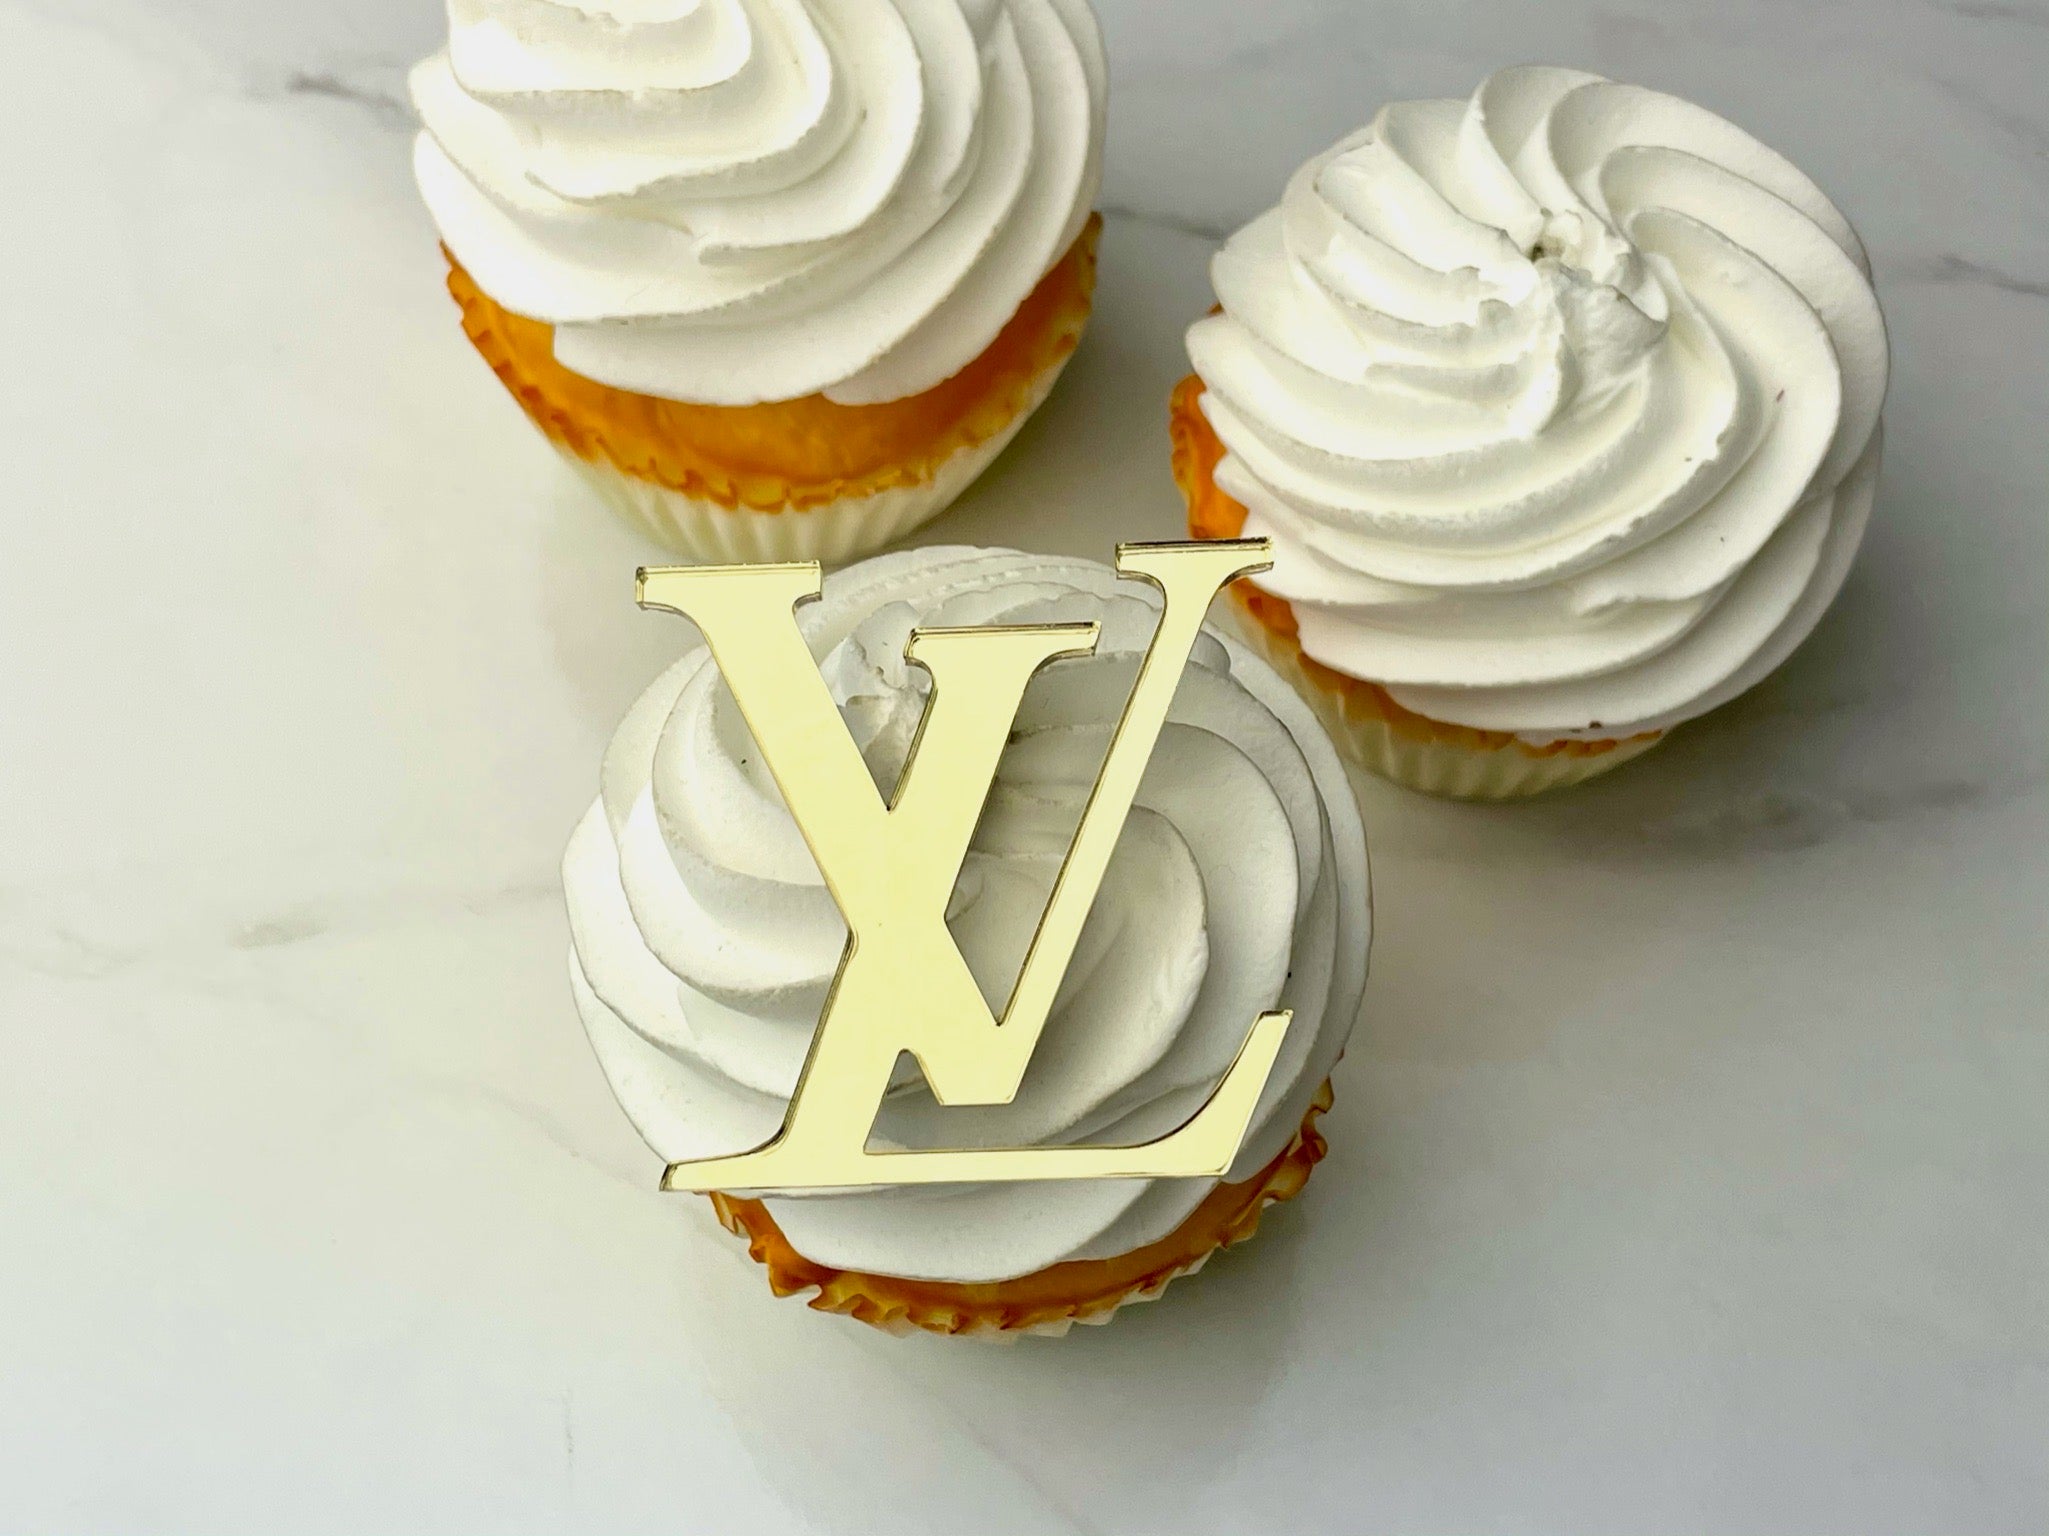 Luxury Designer Brand Cupcake Charms and Toppers (set of 6